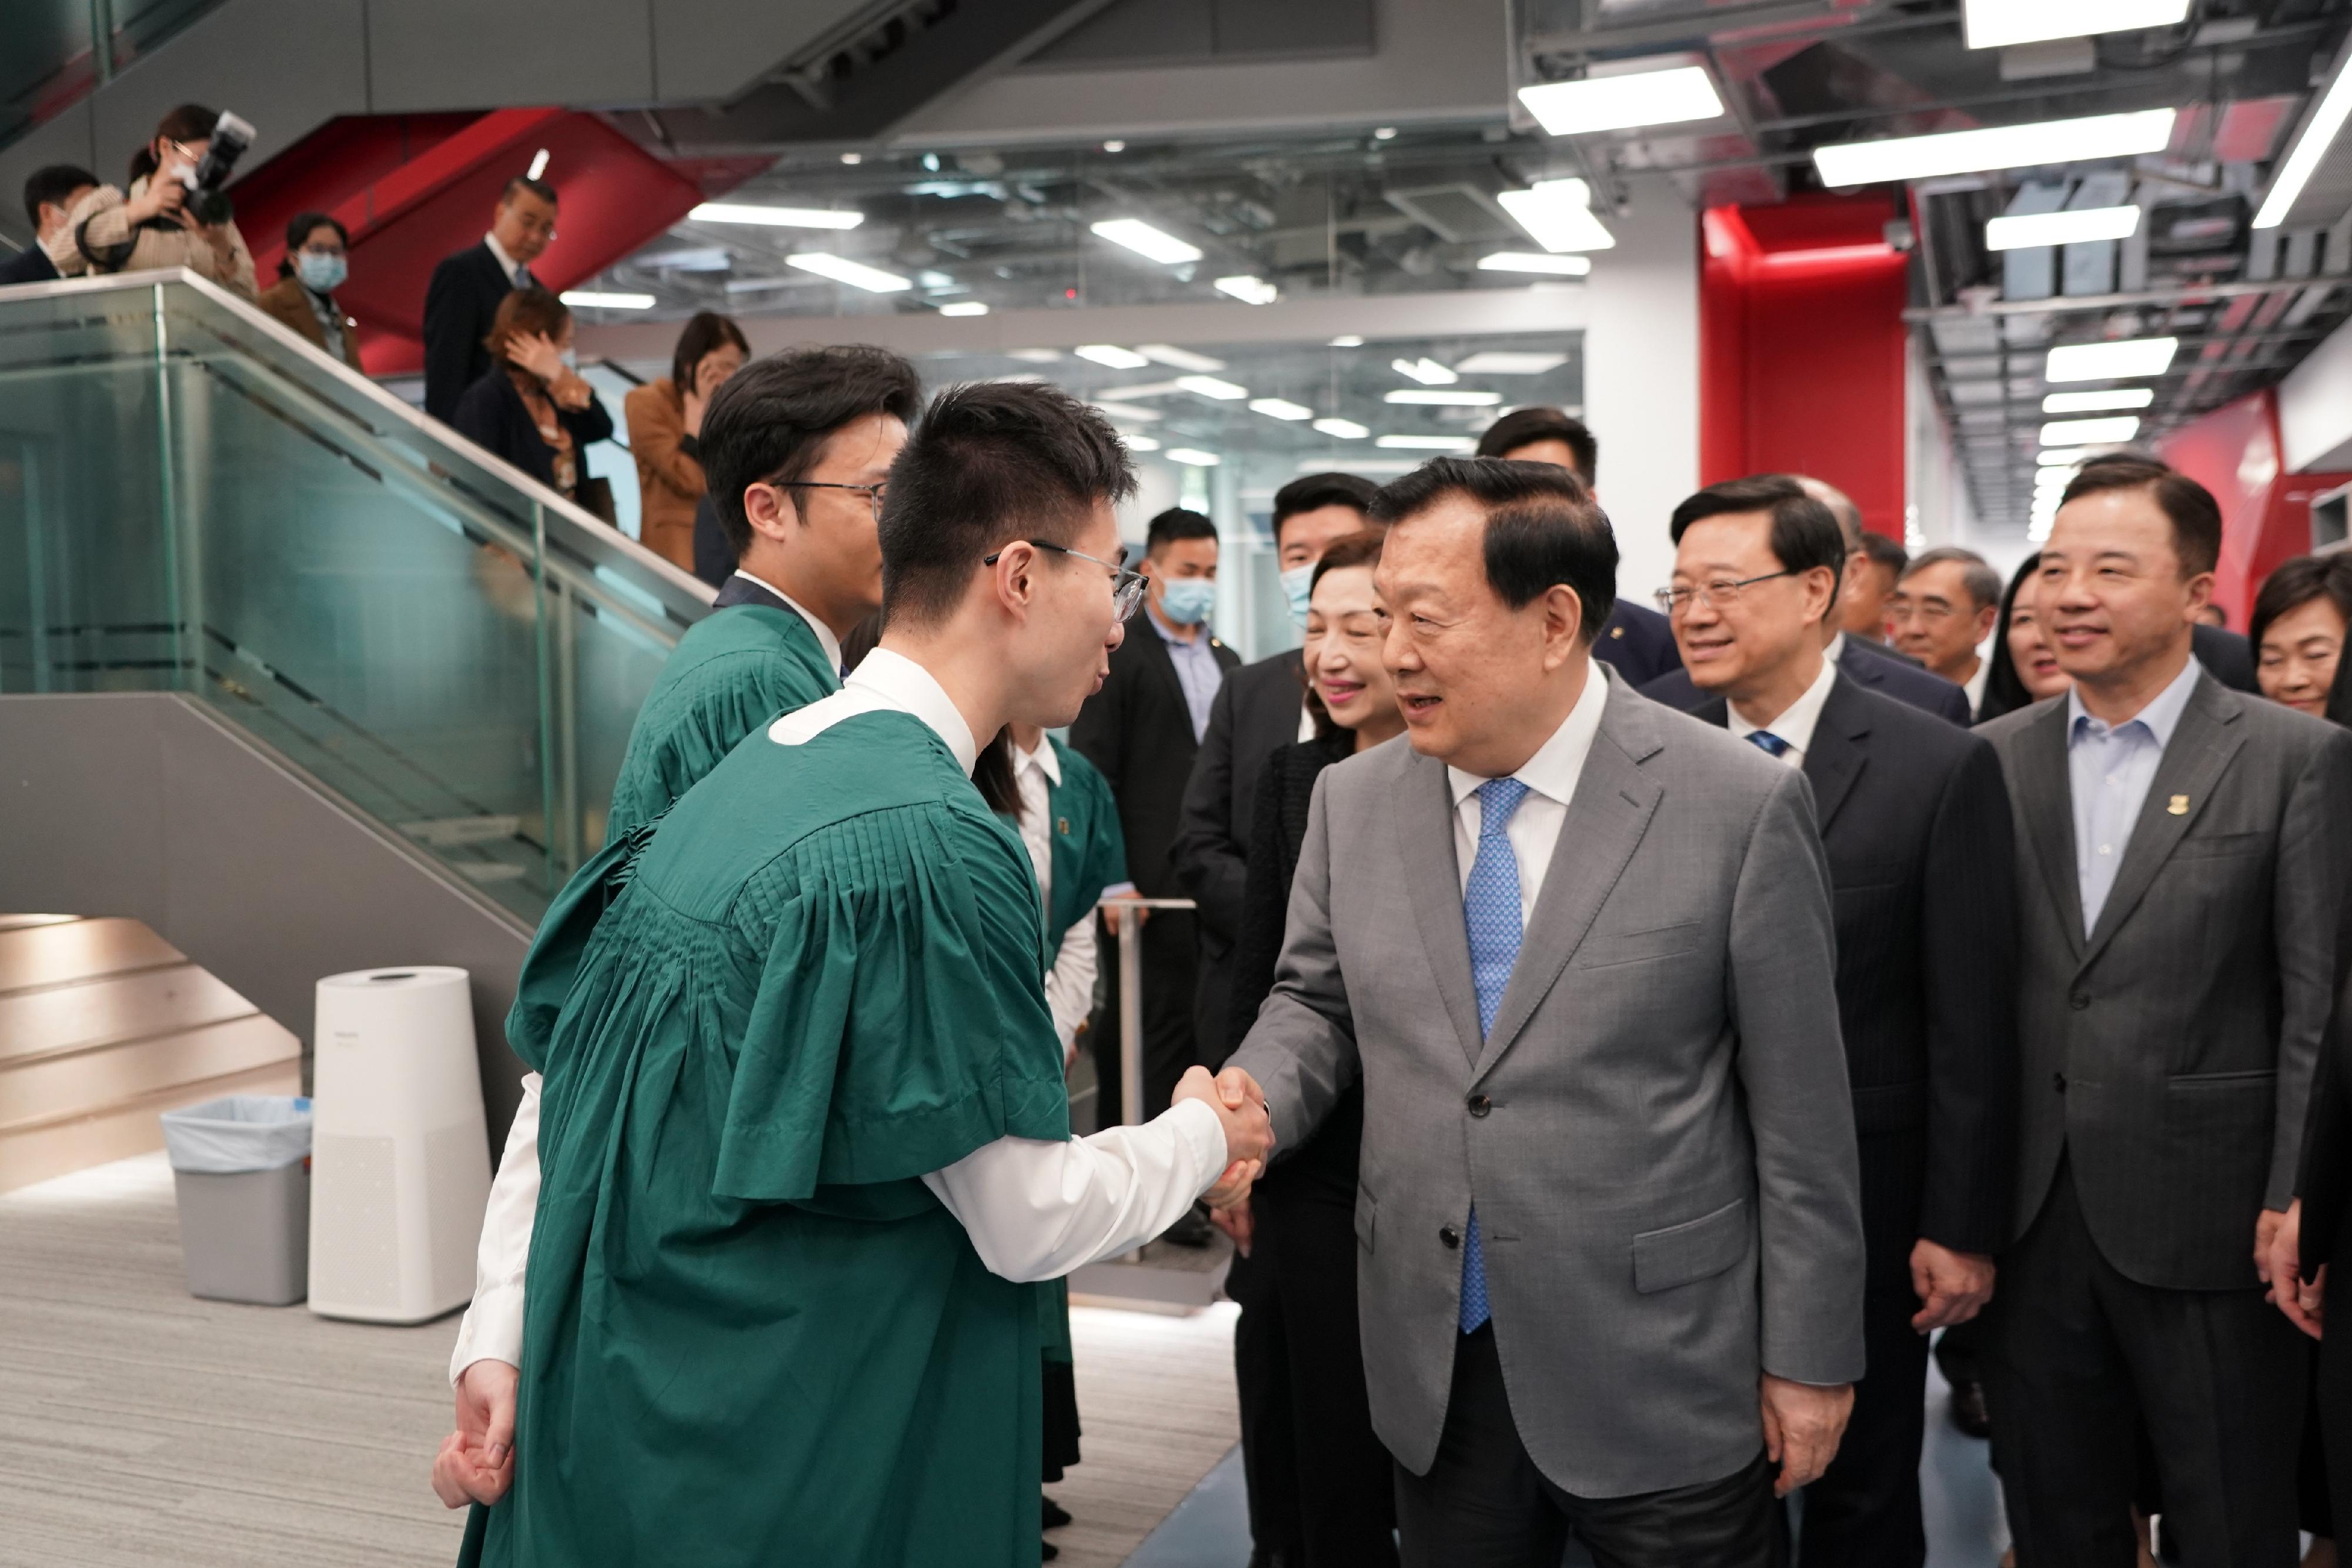 The Vice Chairman of the 13th Chinese People's Political Consultative Conference and Director of the Hong Kong and Macao Affairs Office of the State Council, Mr Xia Baolong (third right), accompanied by the Chief Executive, Mr John Lee (second right), visited the University of Hong Kong on April 18. Photo shows Mr Xia interacting with students.